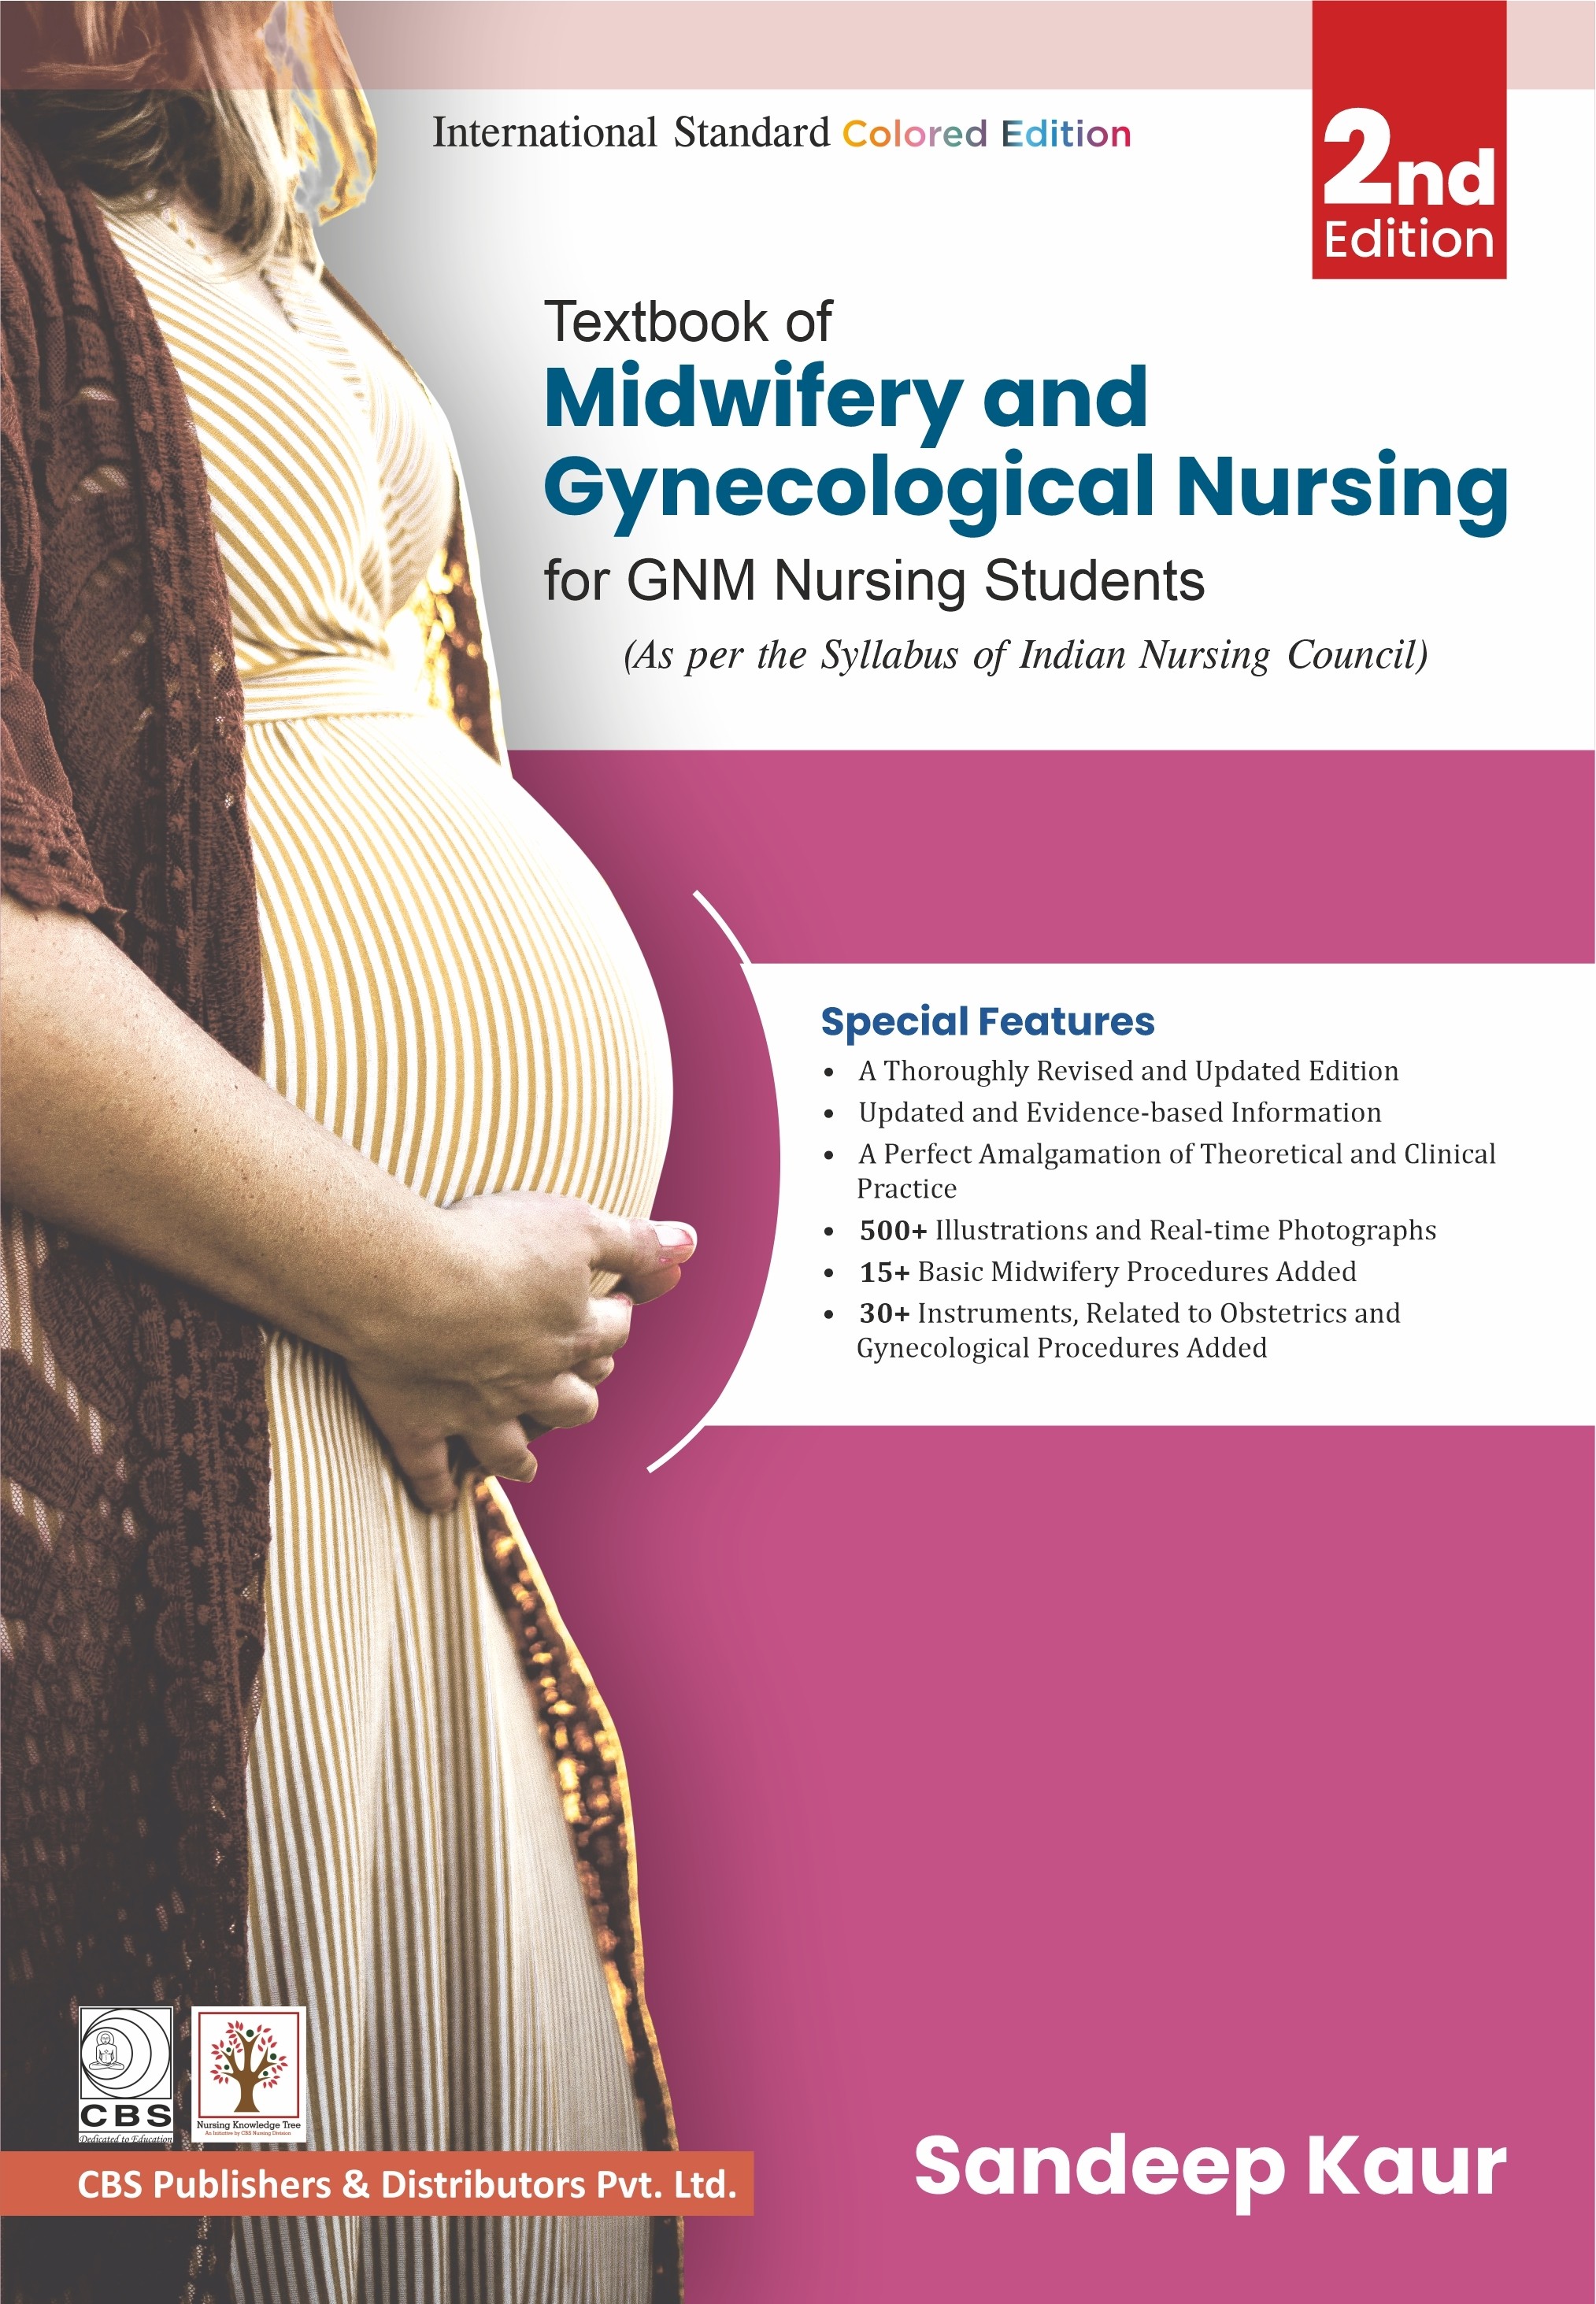 Textbook of Midwifery and Gynecological Nursing for GNM Nursing Students